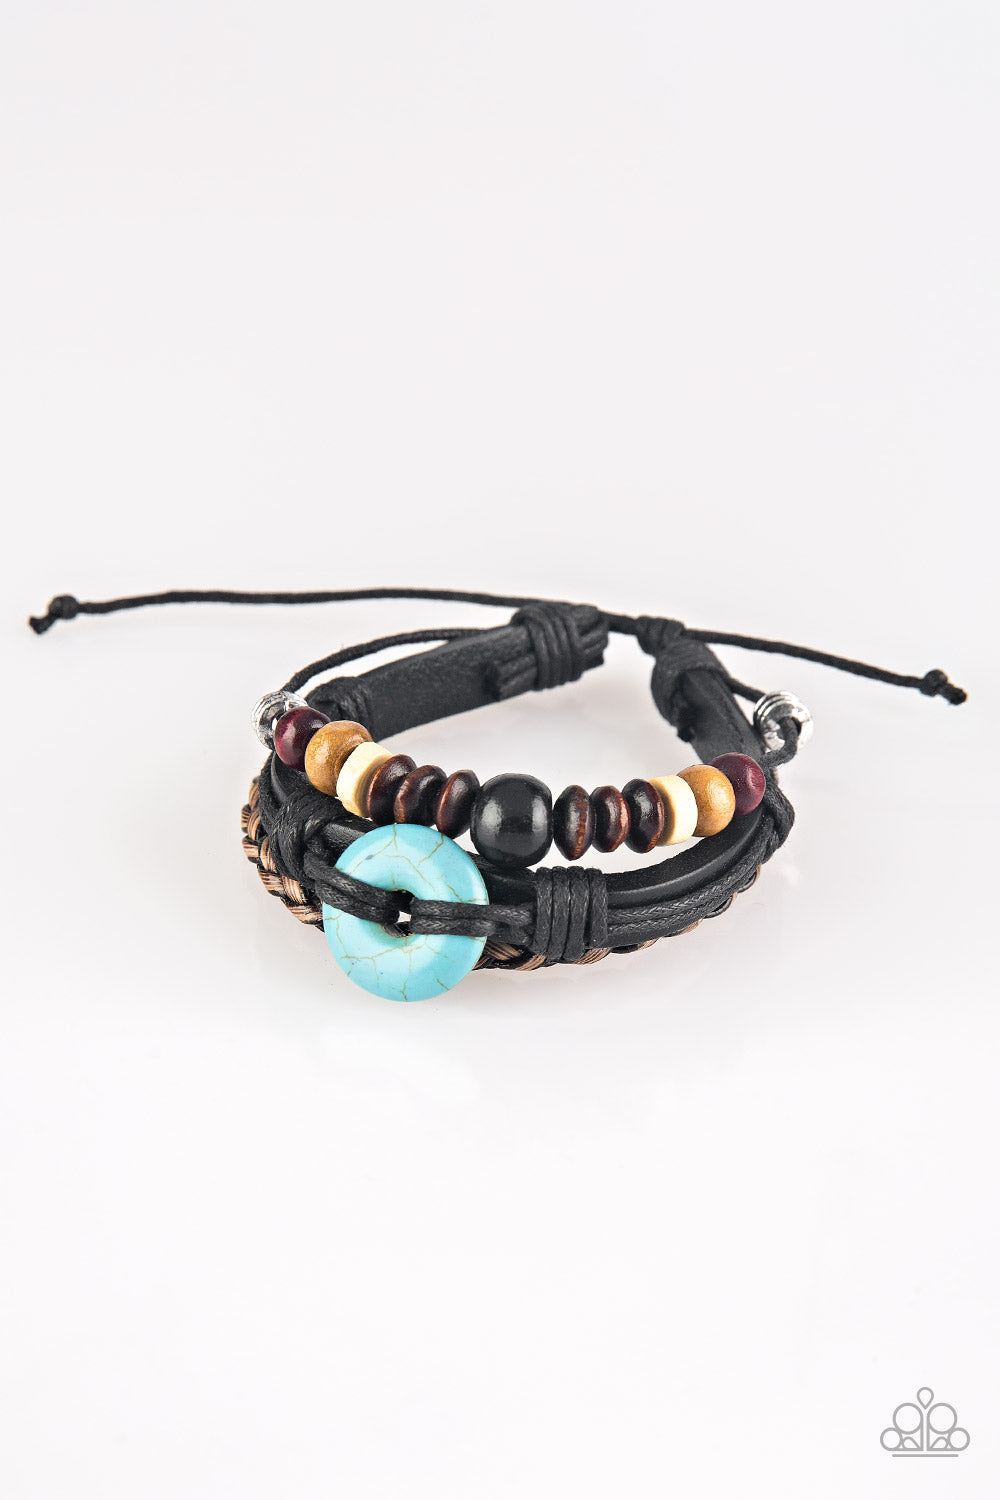 ALL OUT ADVENTURE - BLACK LEATHER WOODEN BEADS BLUE TURQUOISE DONUT BRACELET